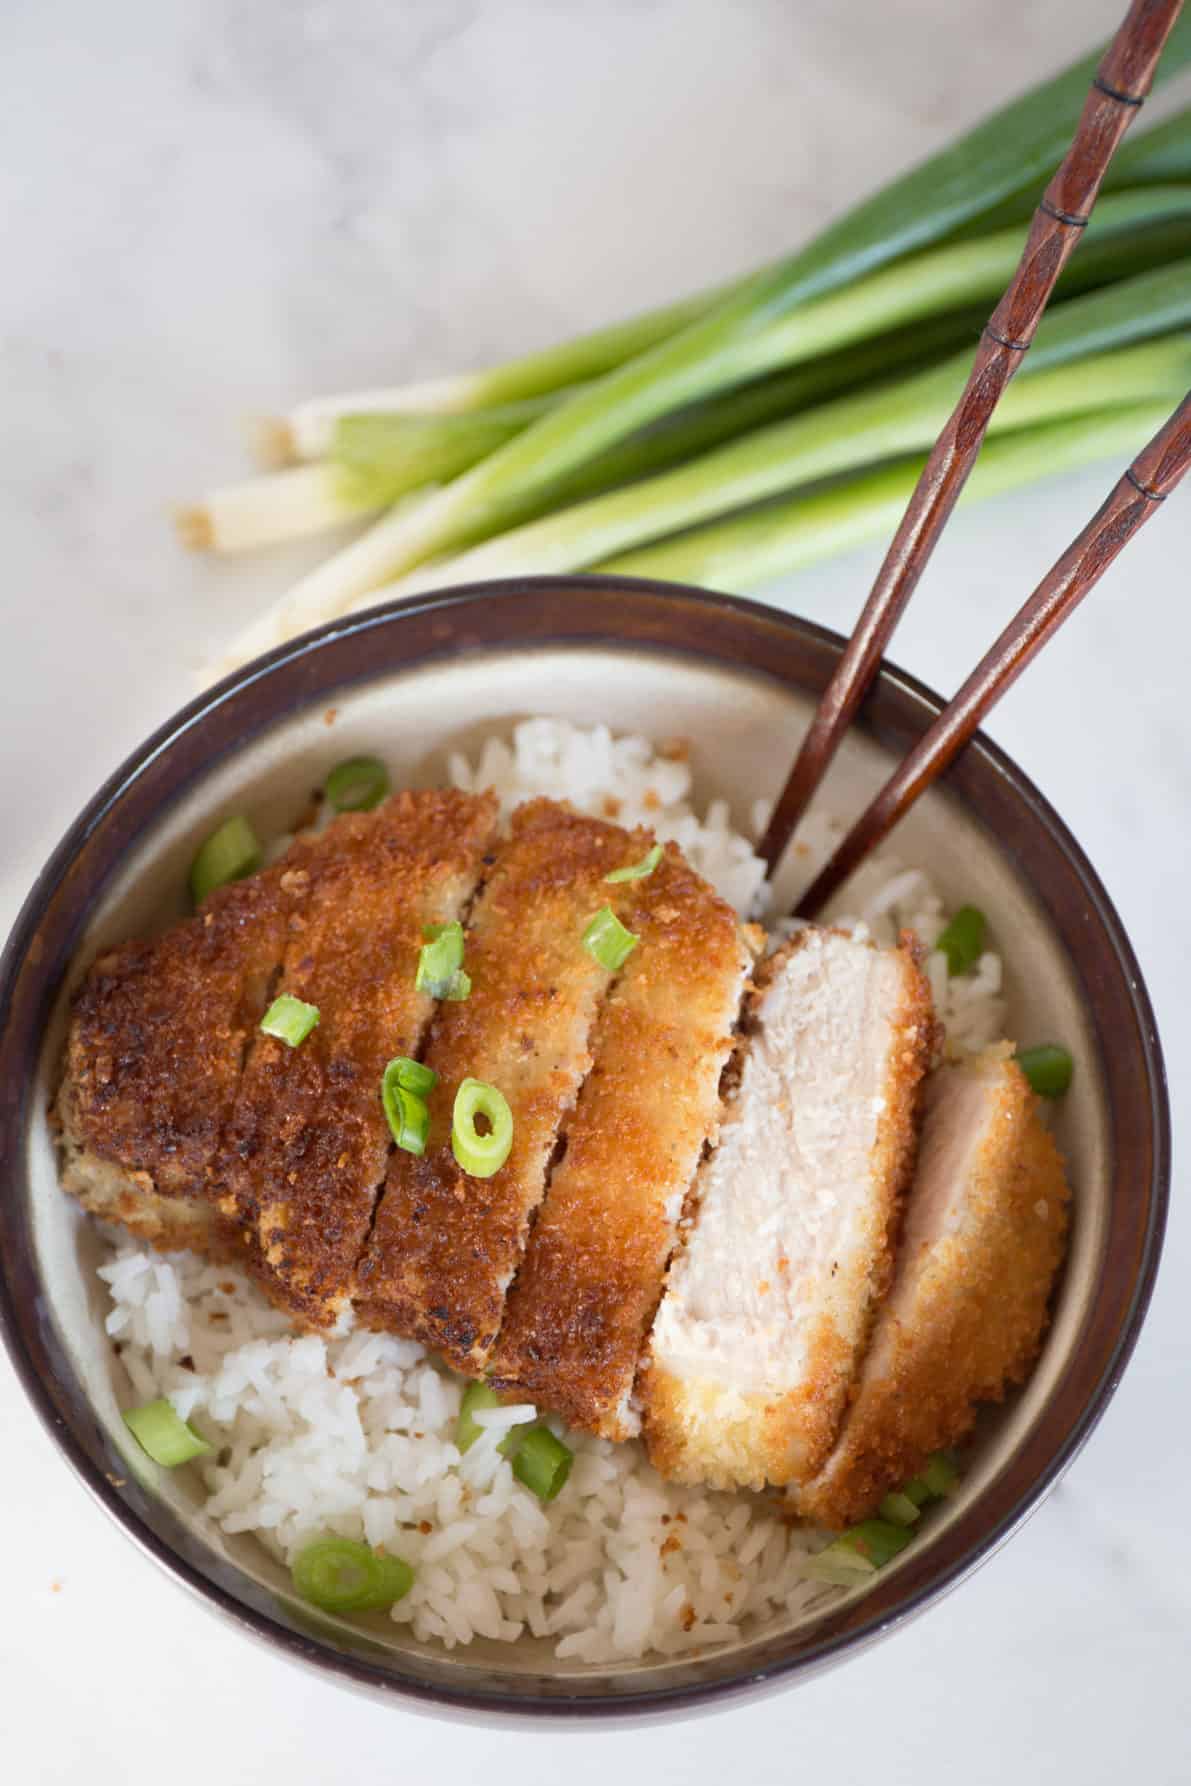 Japanese pork tonkatsu on a bed of rice in a bowl with chopsticks.